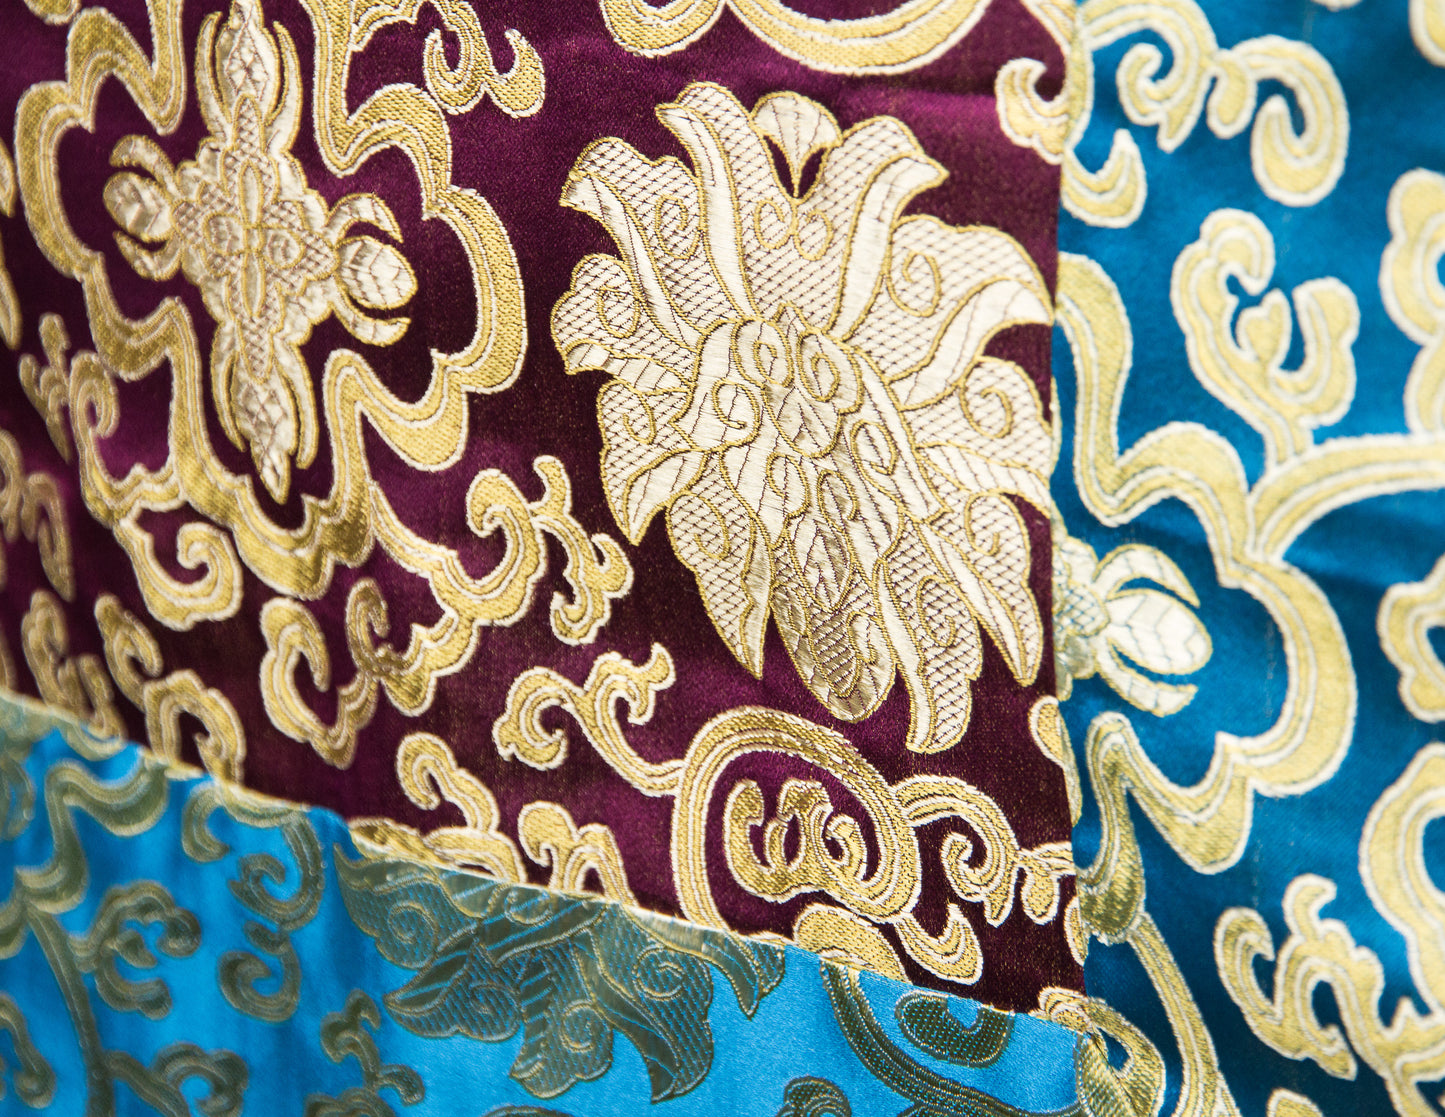 Square Brocade Cloth / Practice Table Cover – Turquoise & Purple